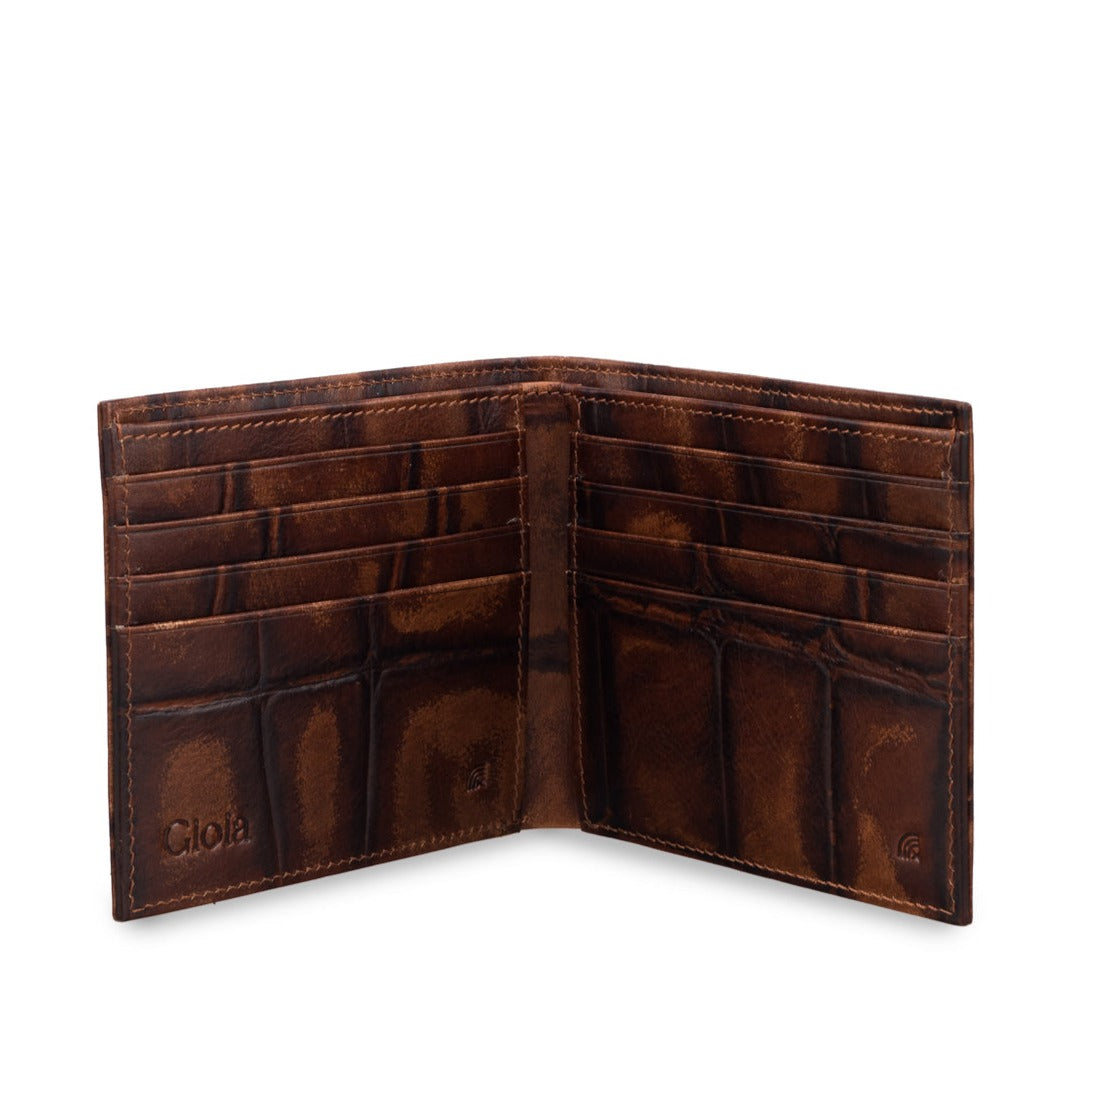 Spalle Coco Bifold Wallet